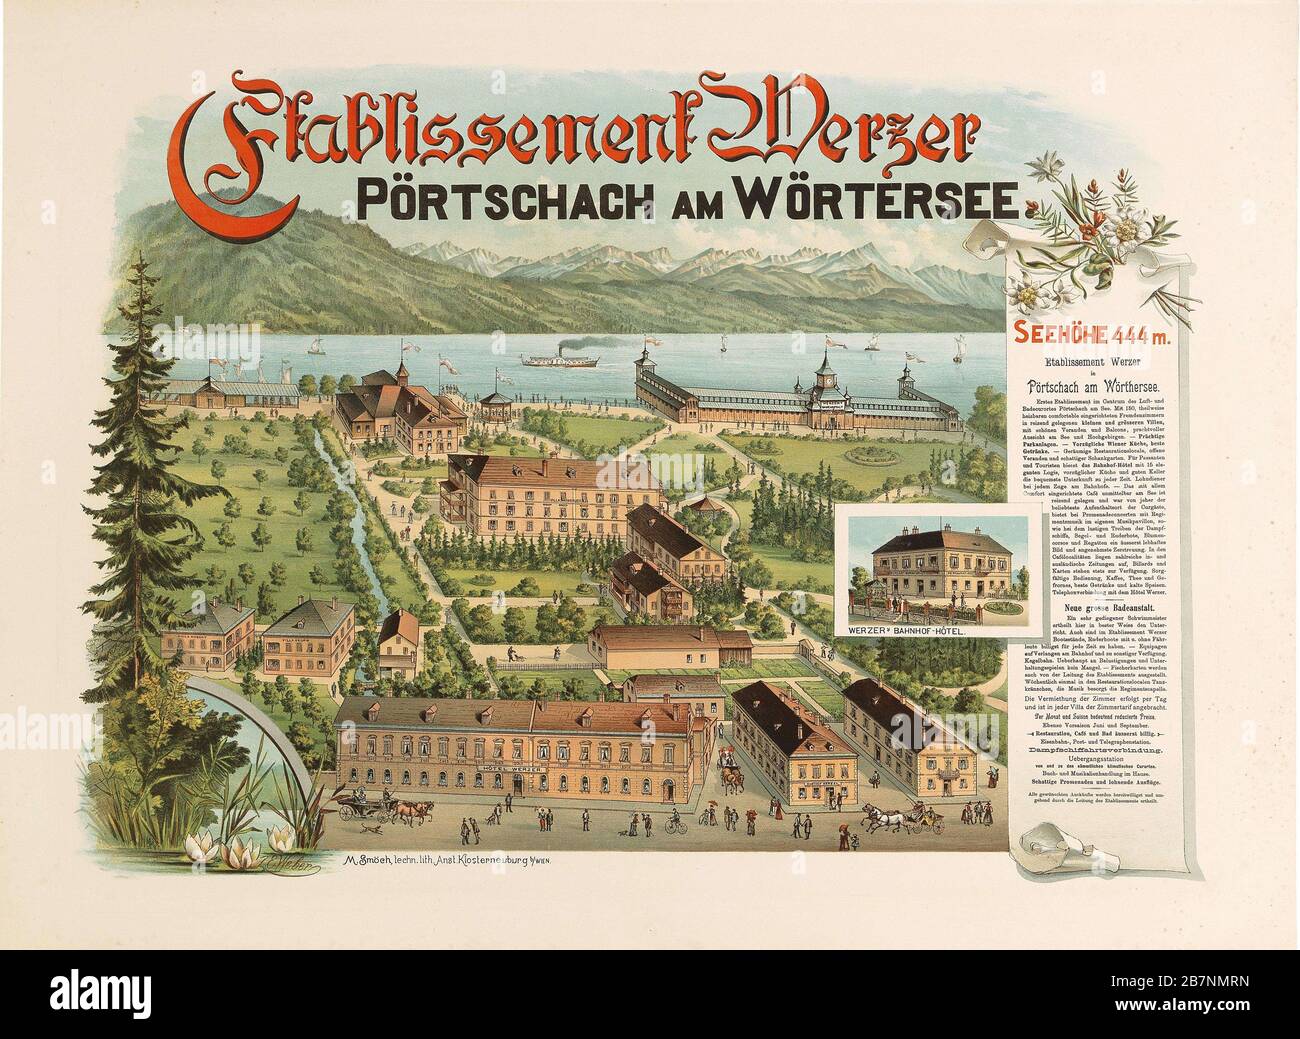 Etablissement Werzer - P&#xf6;rtschach am W&#xf6;rthersee, c. 1890. Private Collection. Stock Photo